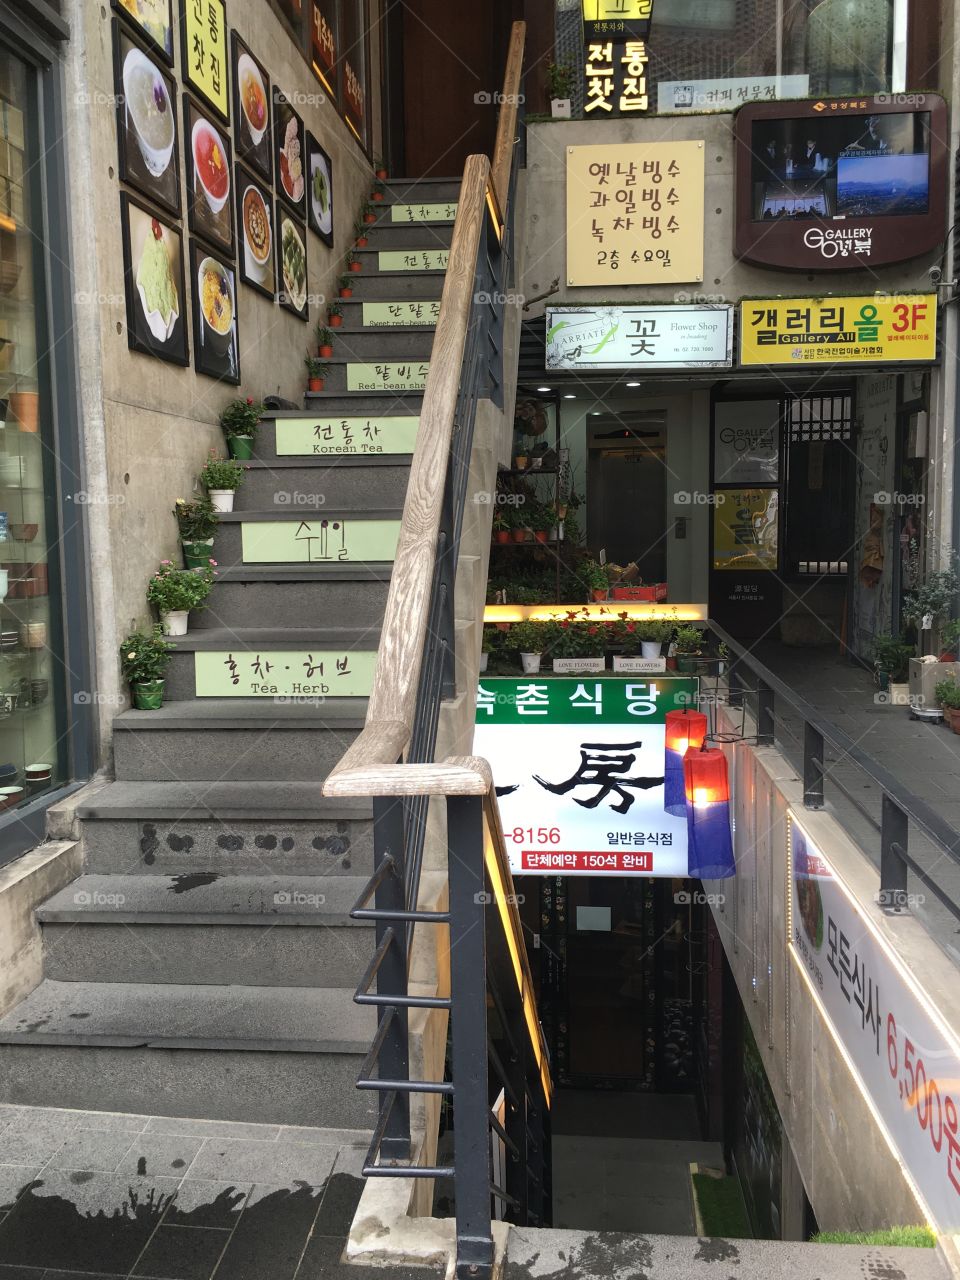 Stairs in Insadong, Seoul, South Korea